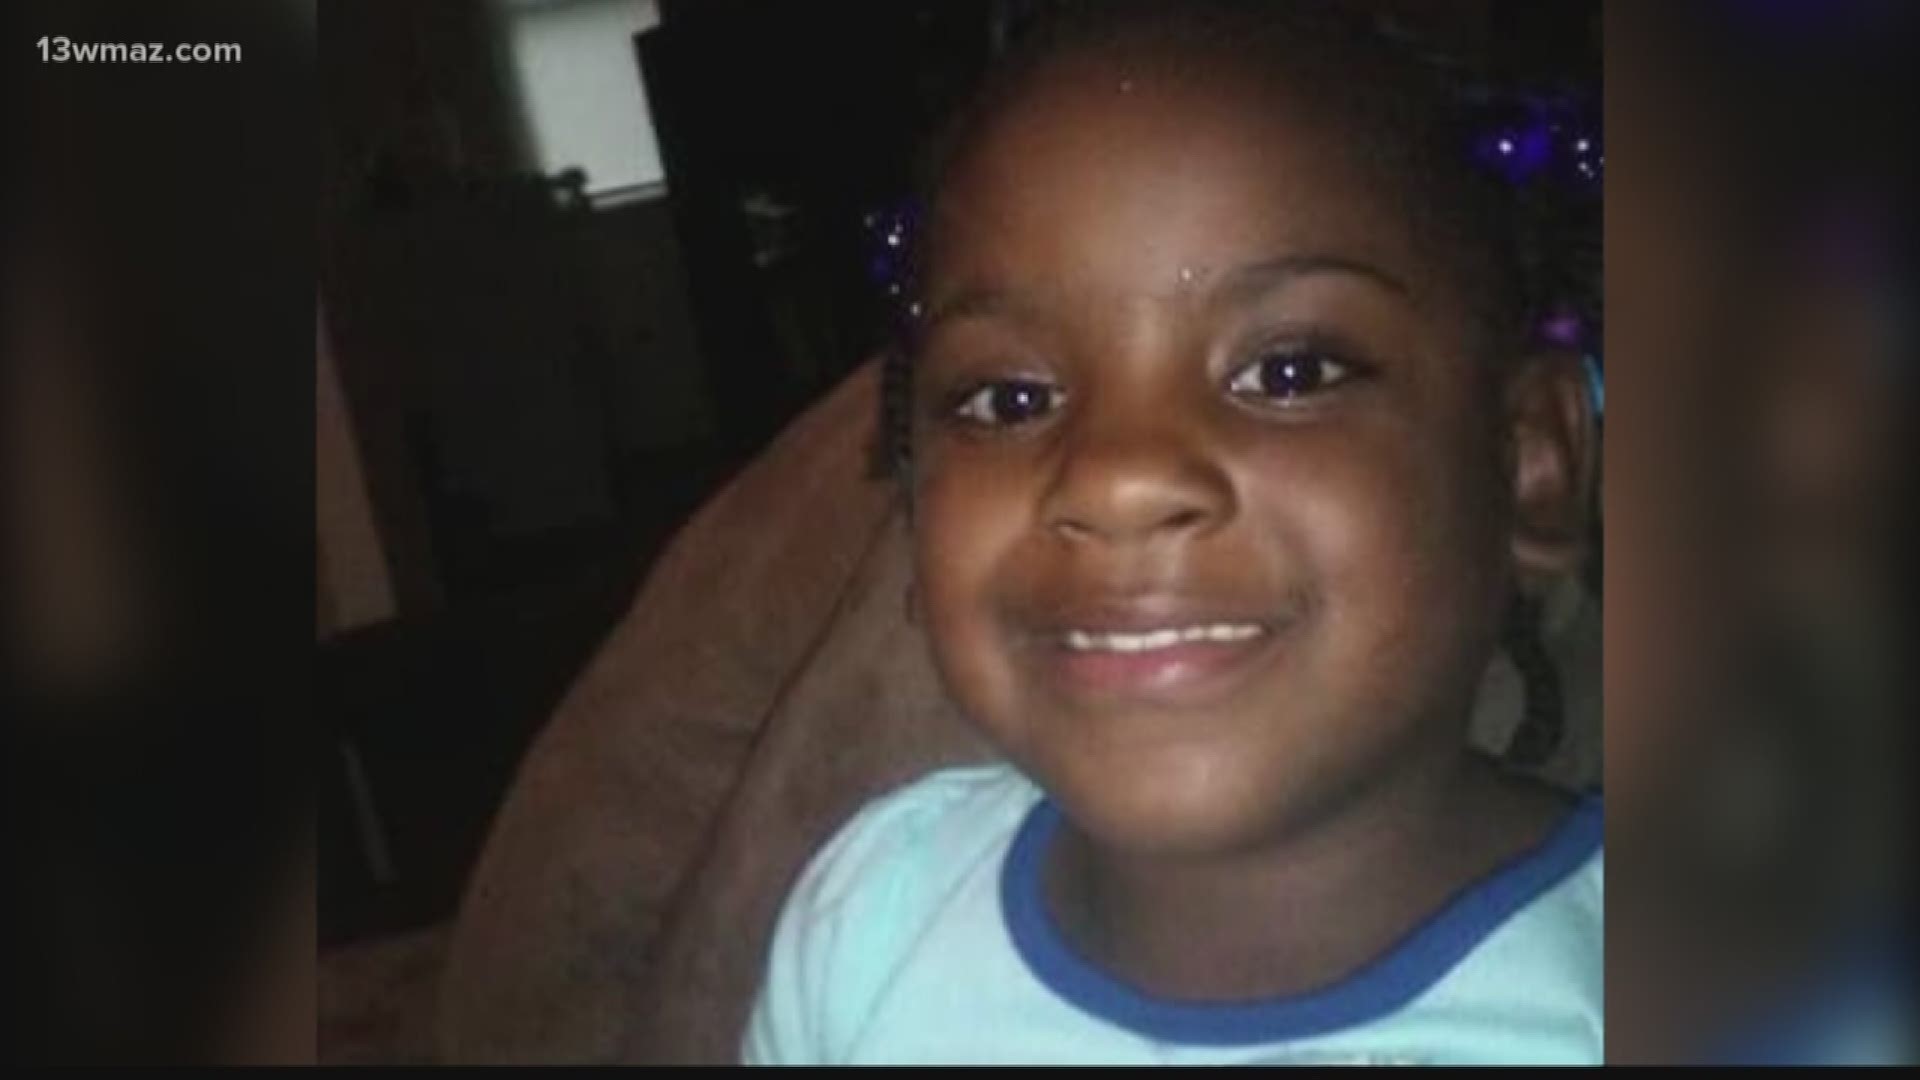 A Houston County judge this week threw out charges against a former bus driver in the fatal accident that killed 6-year-old Parkwood Elementary student Arlana Haynes. According to an order filed Thursday, Judge Katherine Lumsden wrote that Shalita Harris’ lawyer filed a late motion on Tuesday to throw out her indictment.